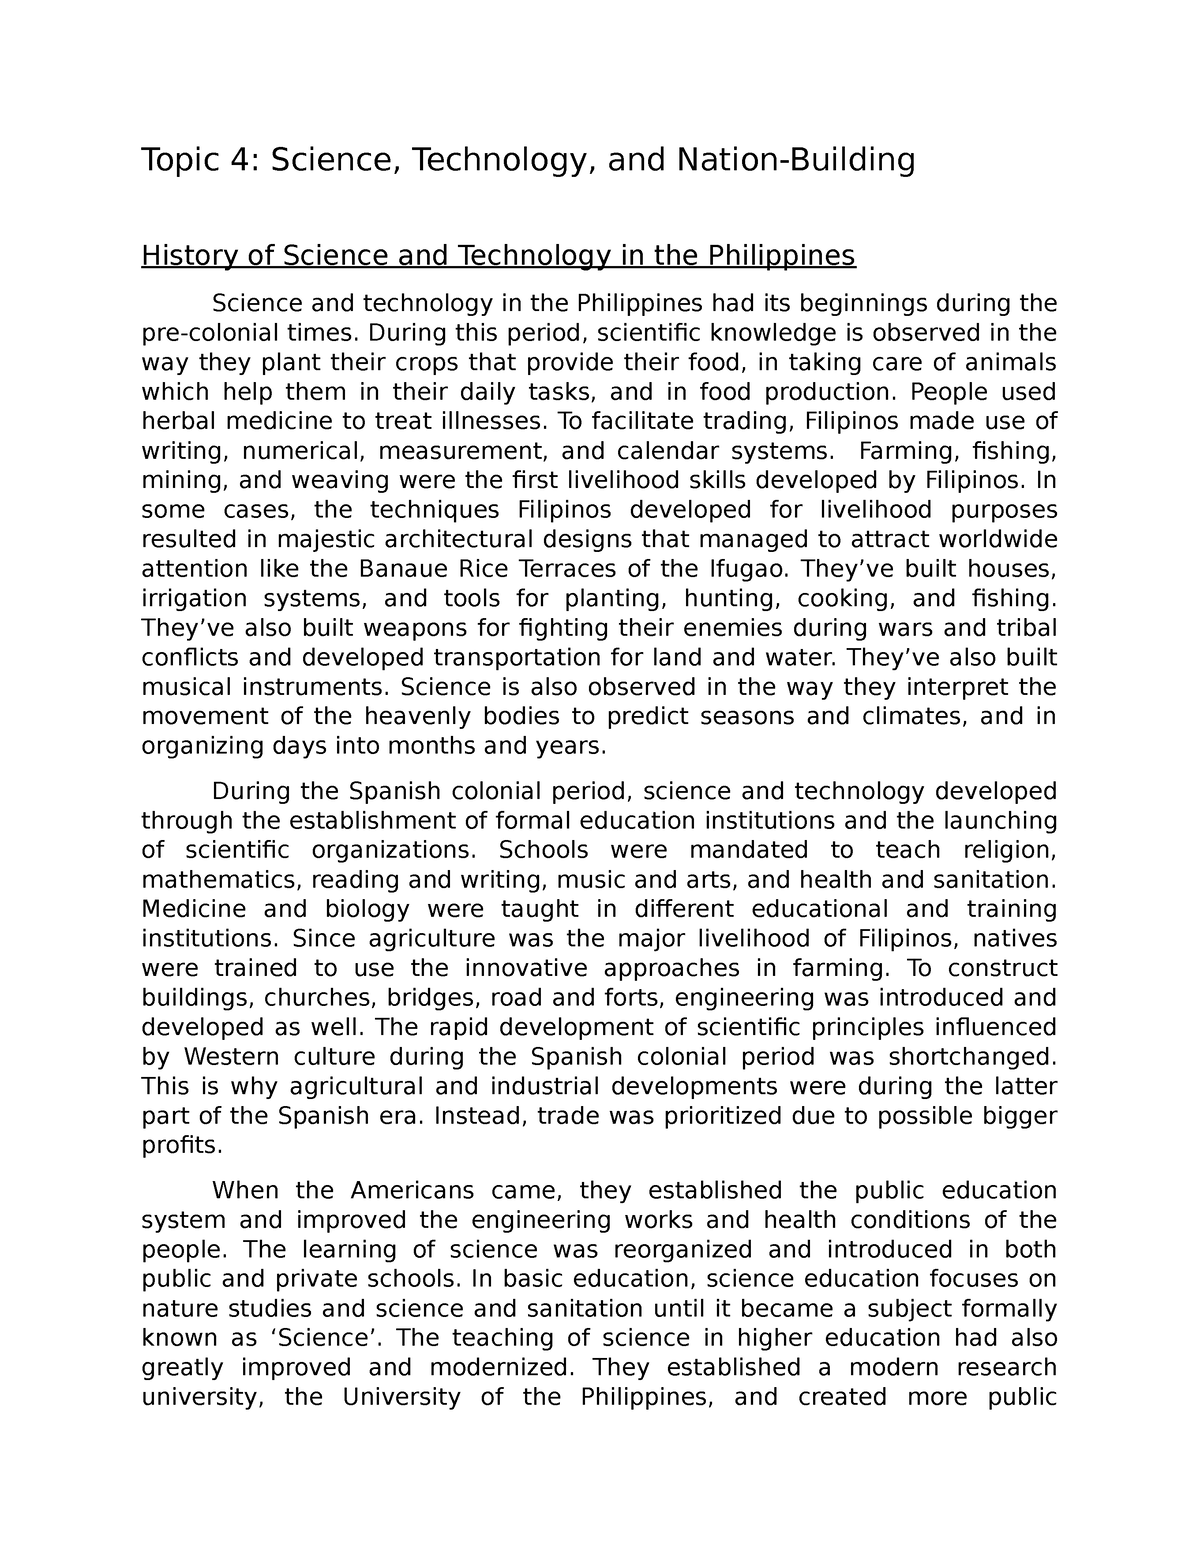 thesis about science and technology